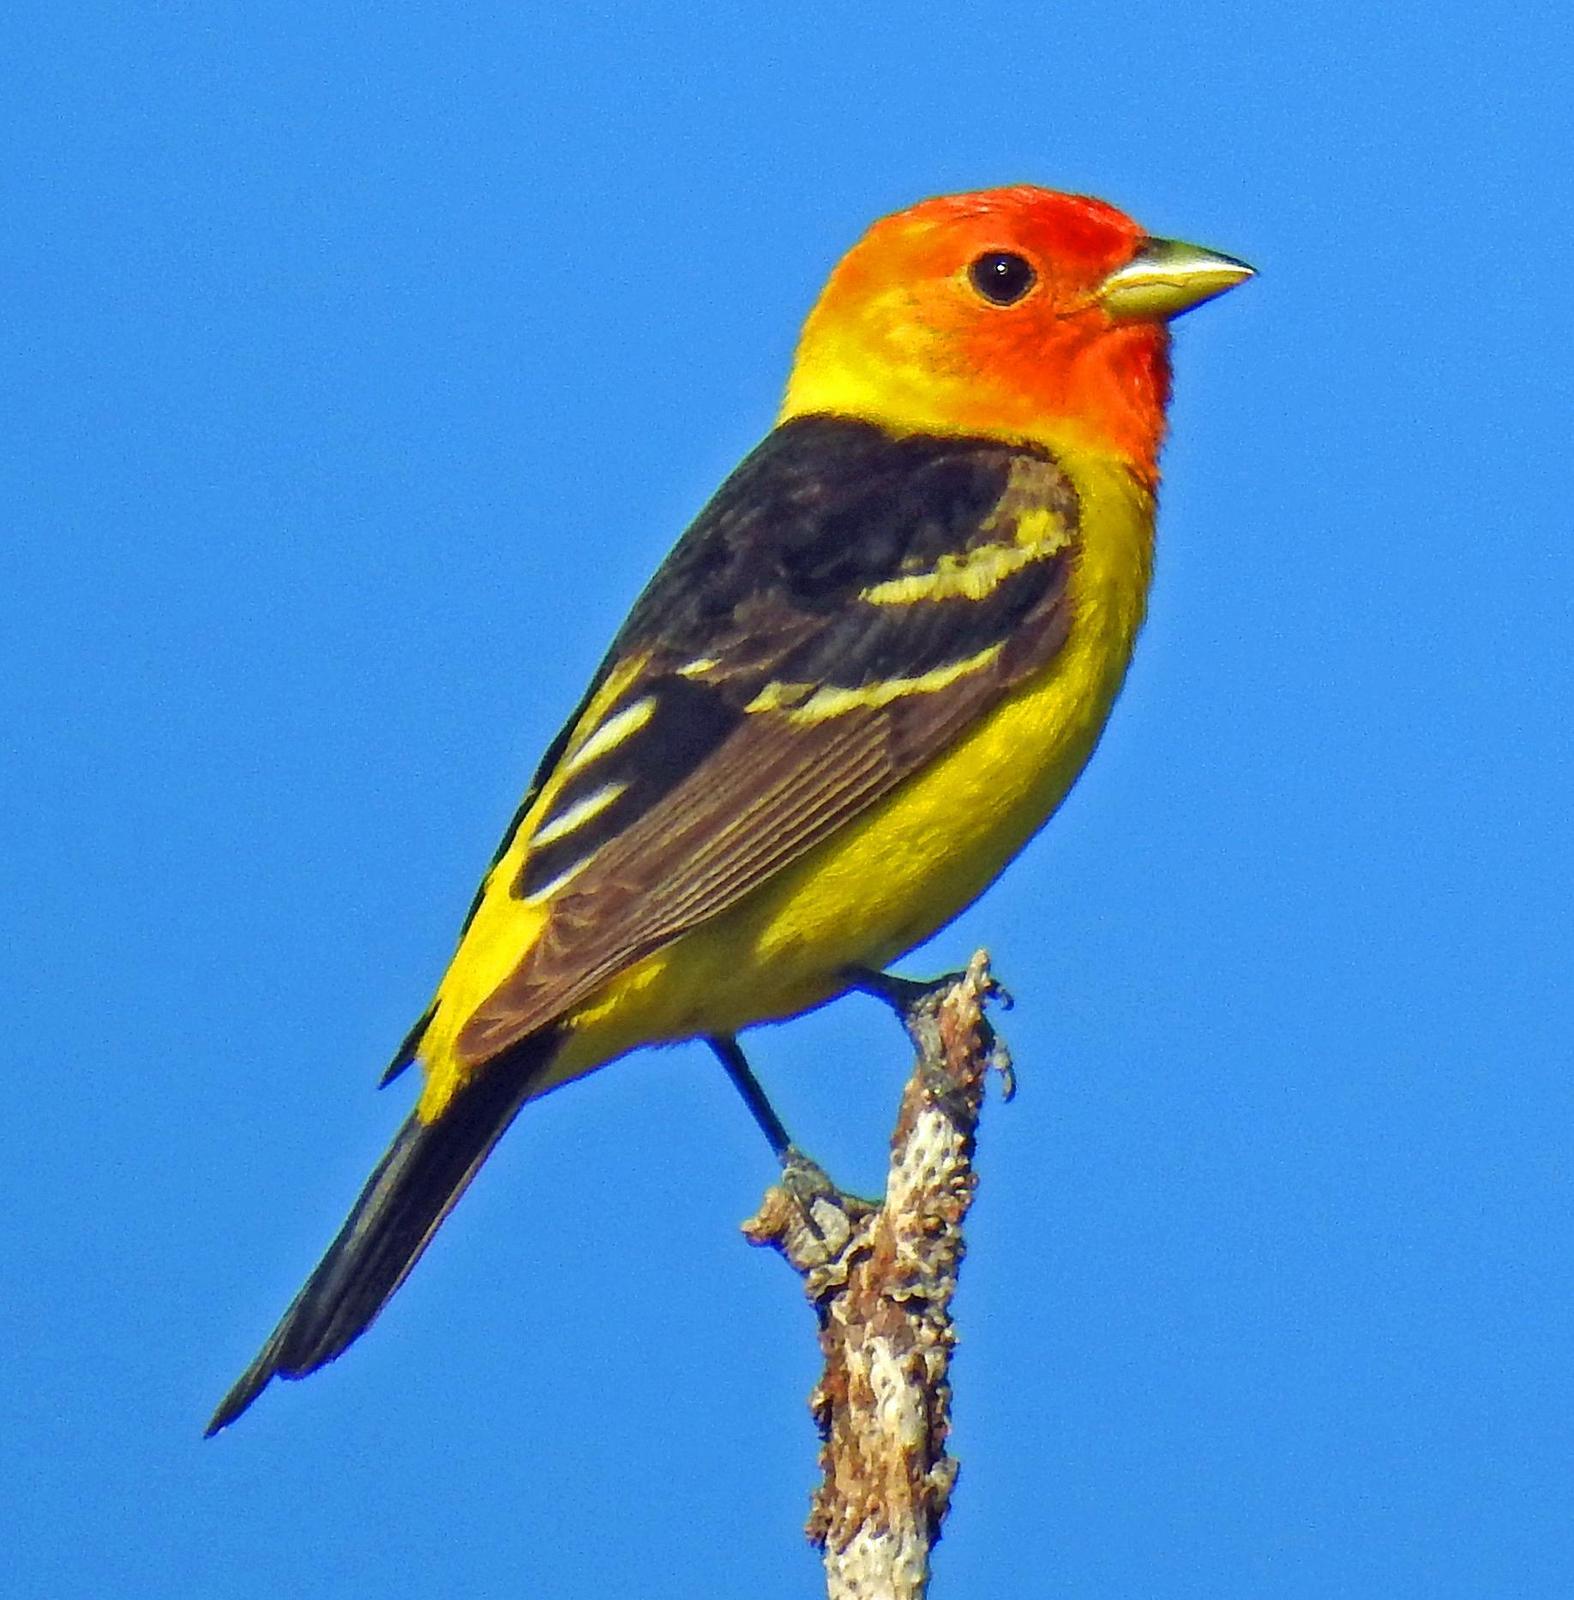 Western Tanager Photo by Tom Gannon